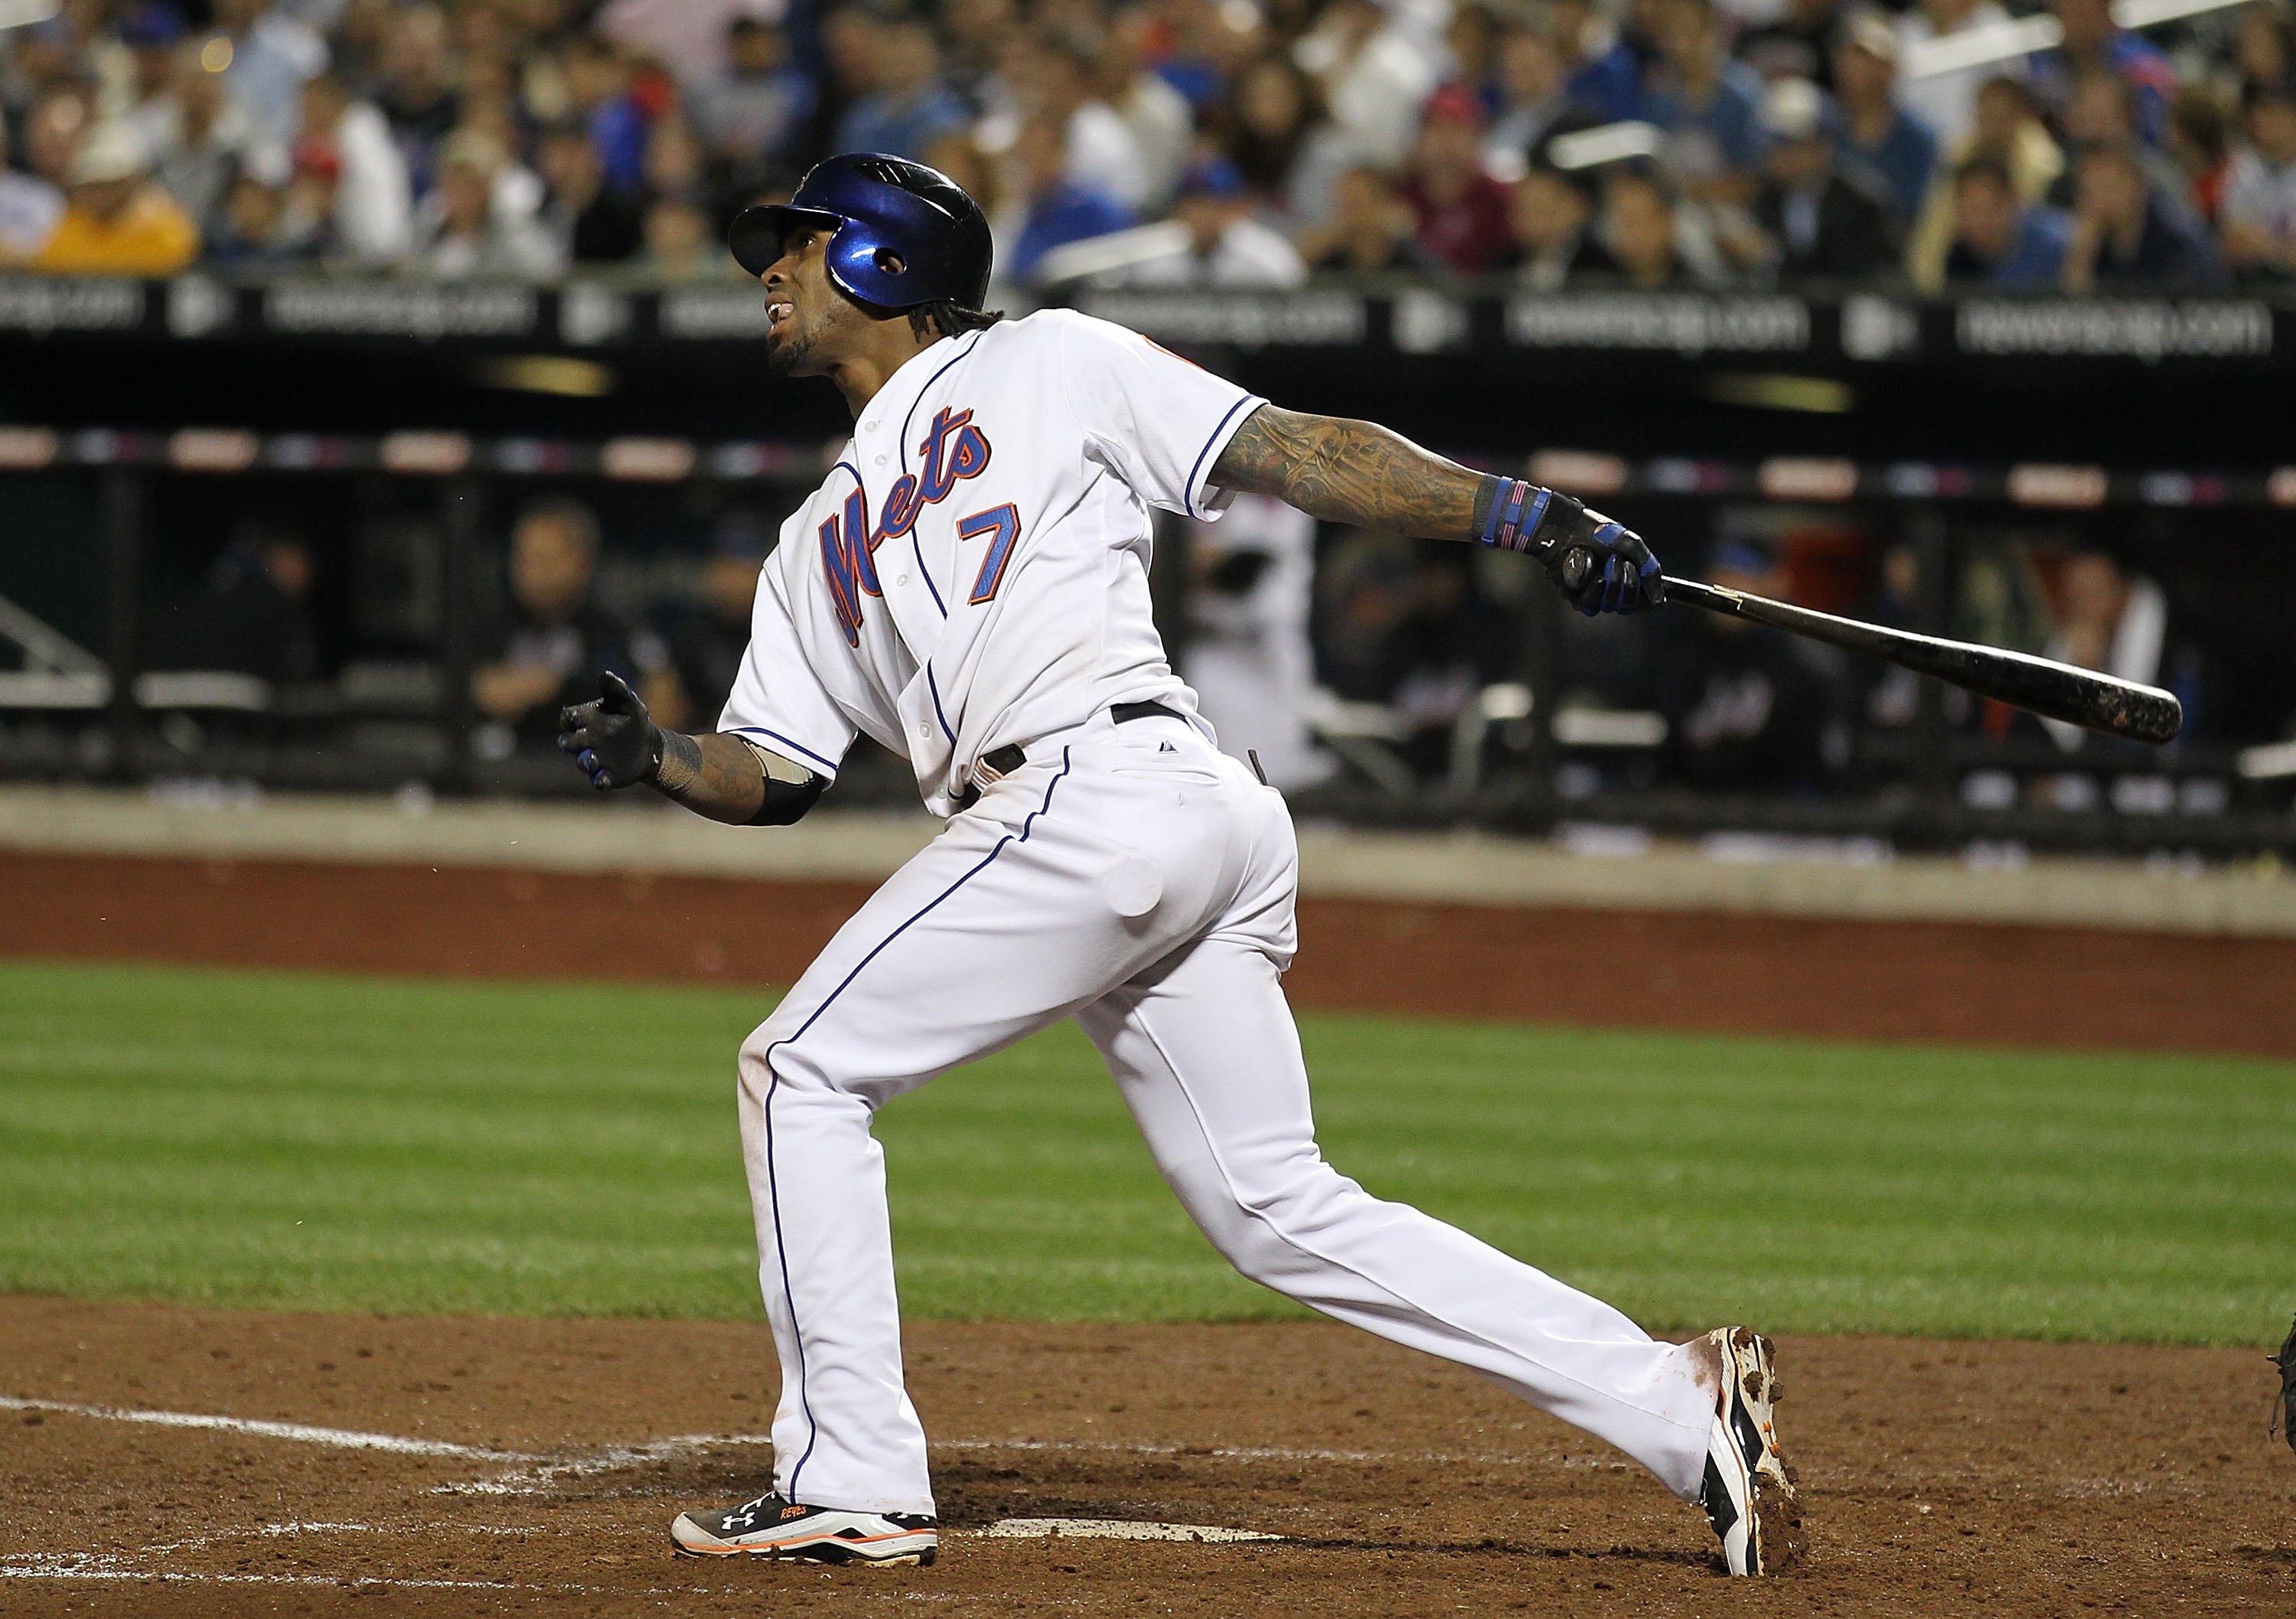 Keidel: Jose Reyes, The New York Mets And The Sad Business Of